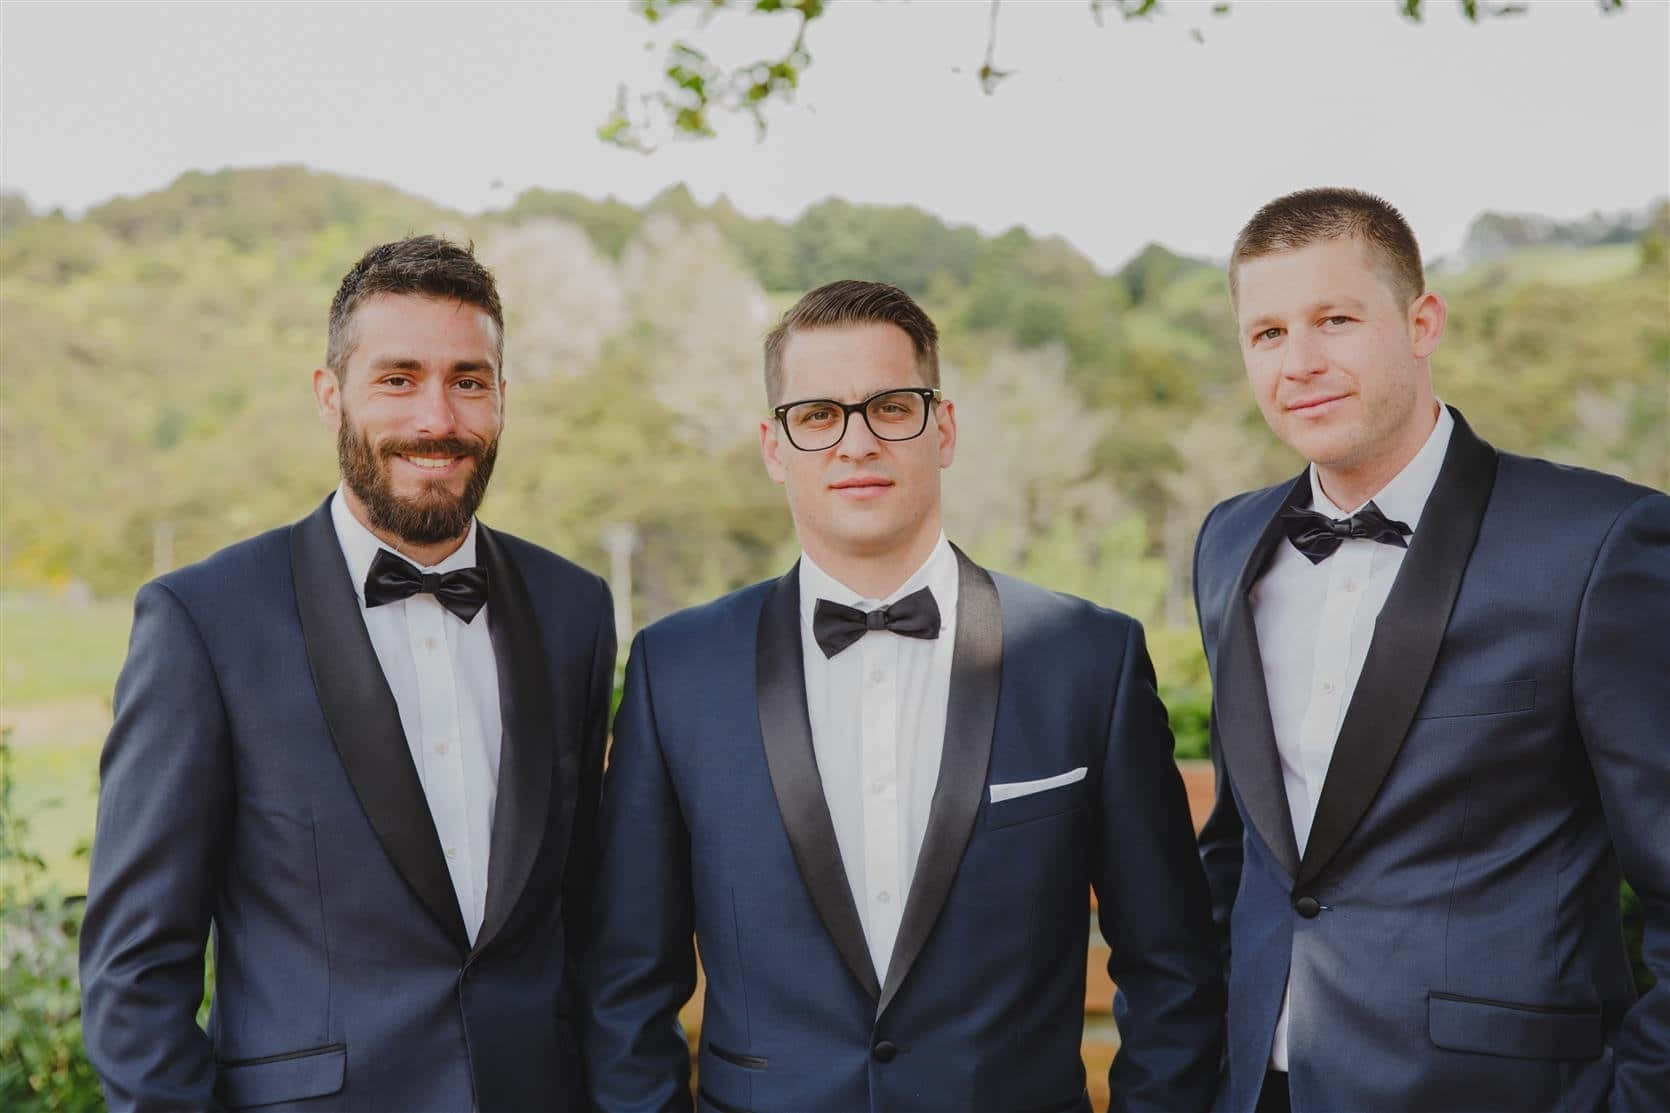 Three Groomsmen In Tuxedos Standing Together